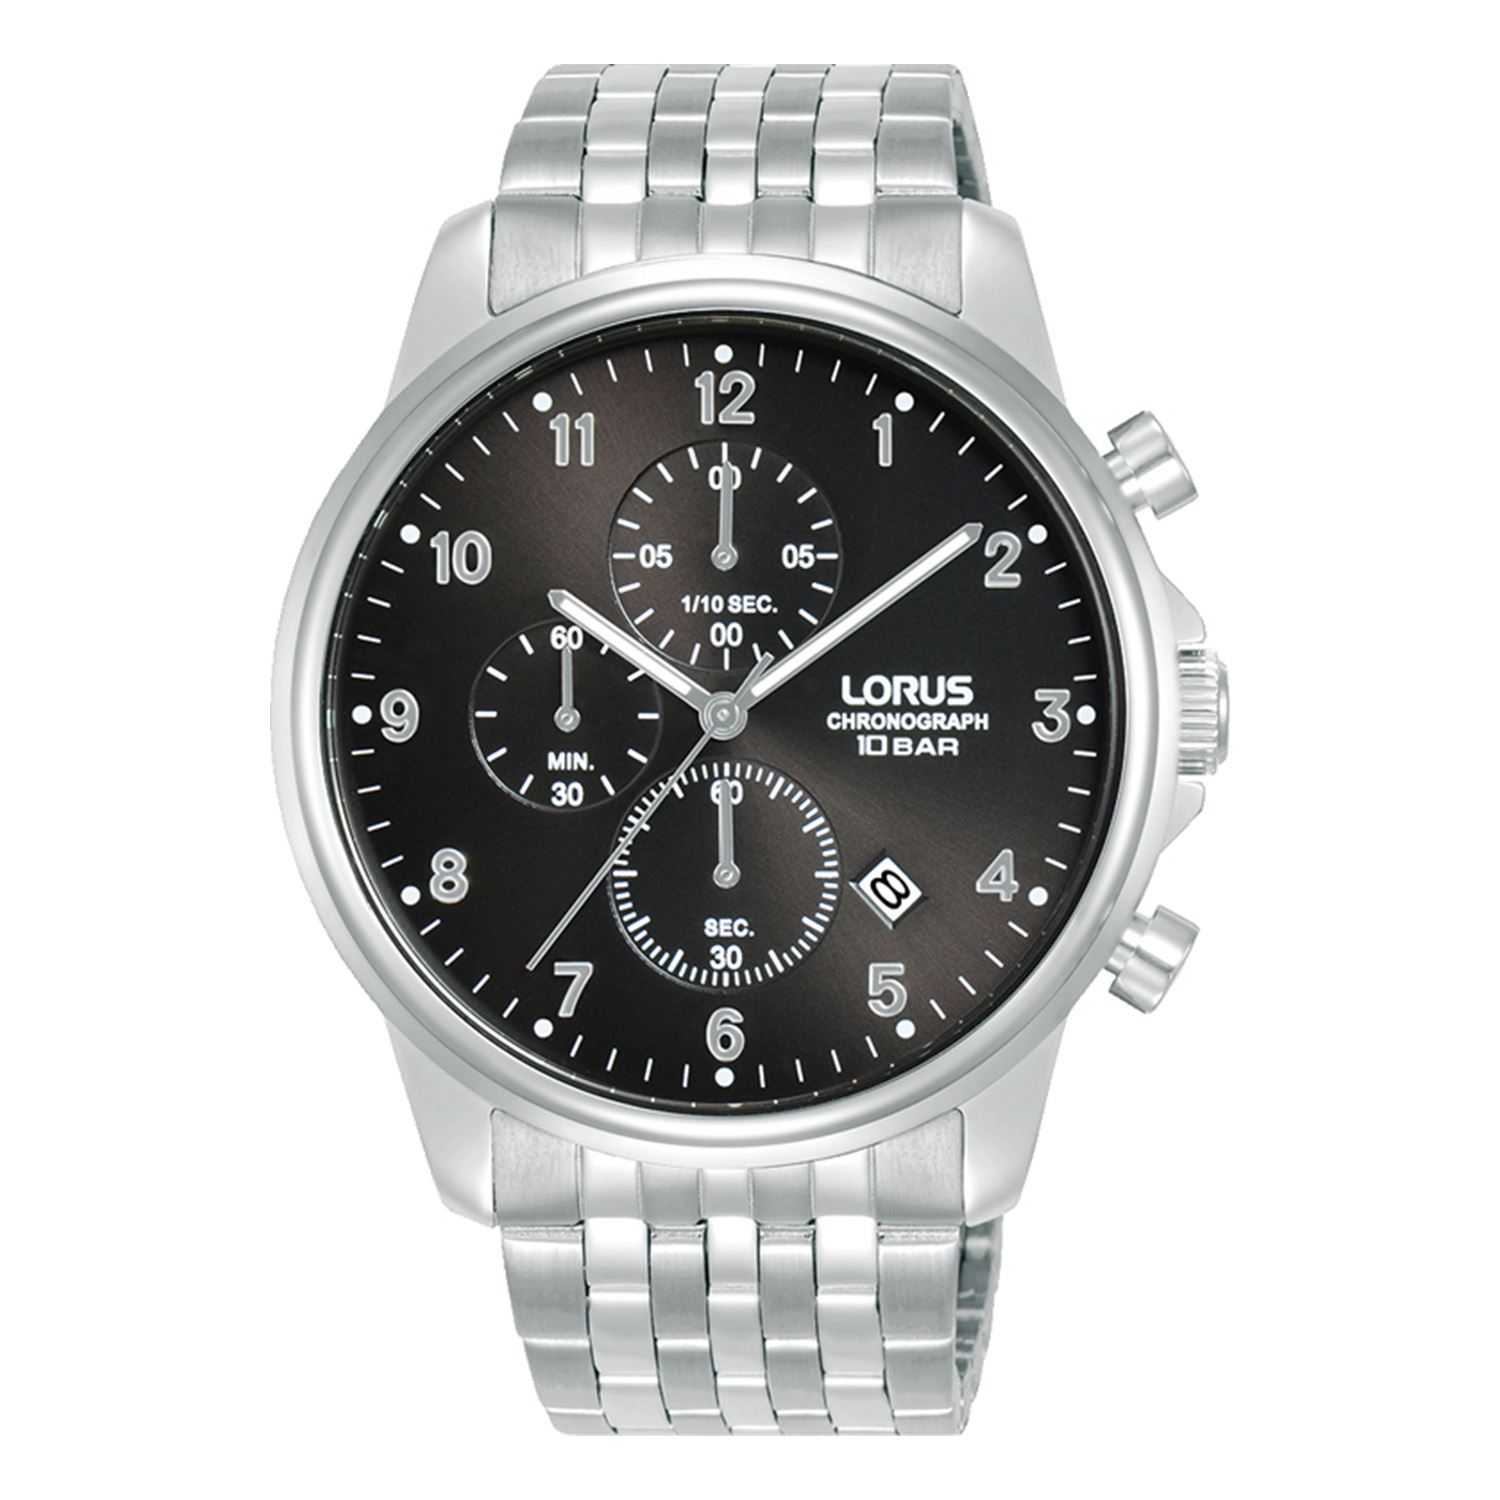 Mens LORUS stainless steel watch with black dial and silver bracelet.